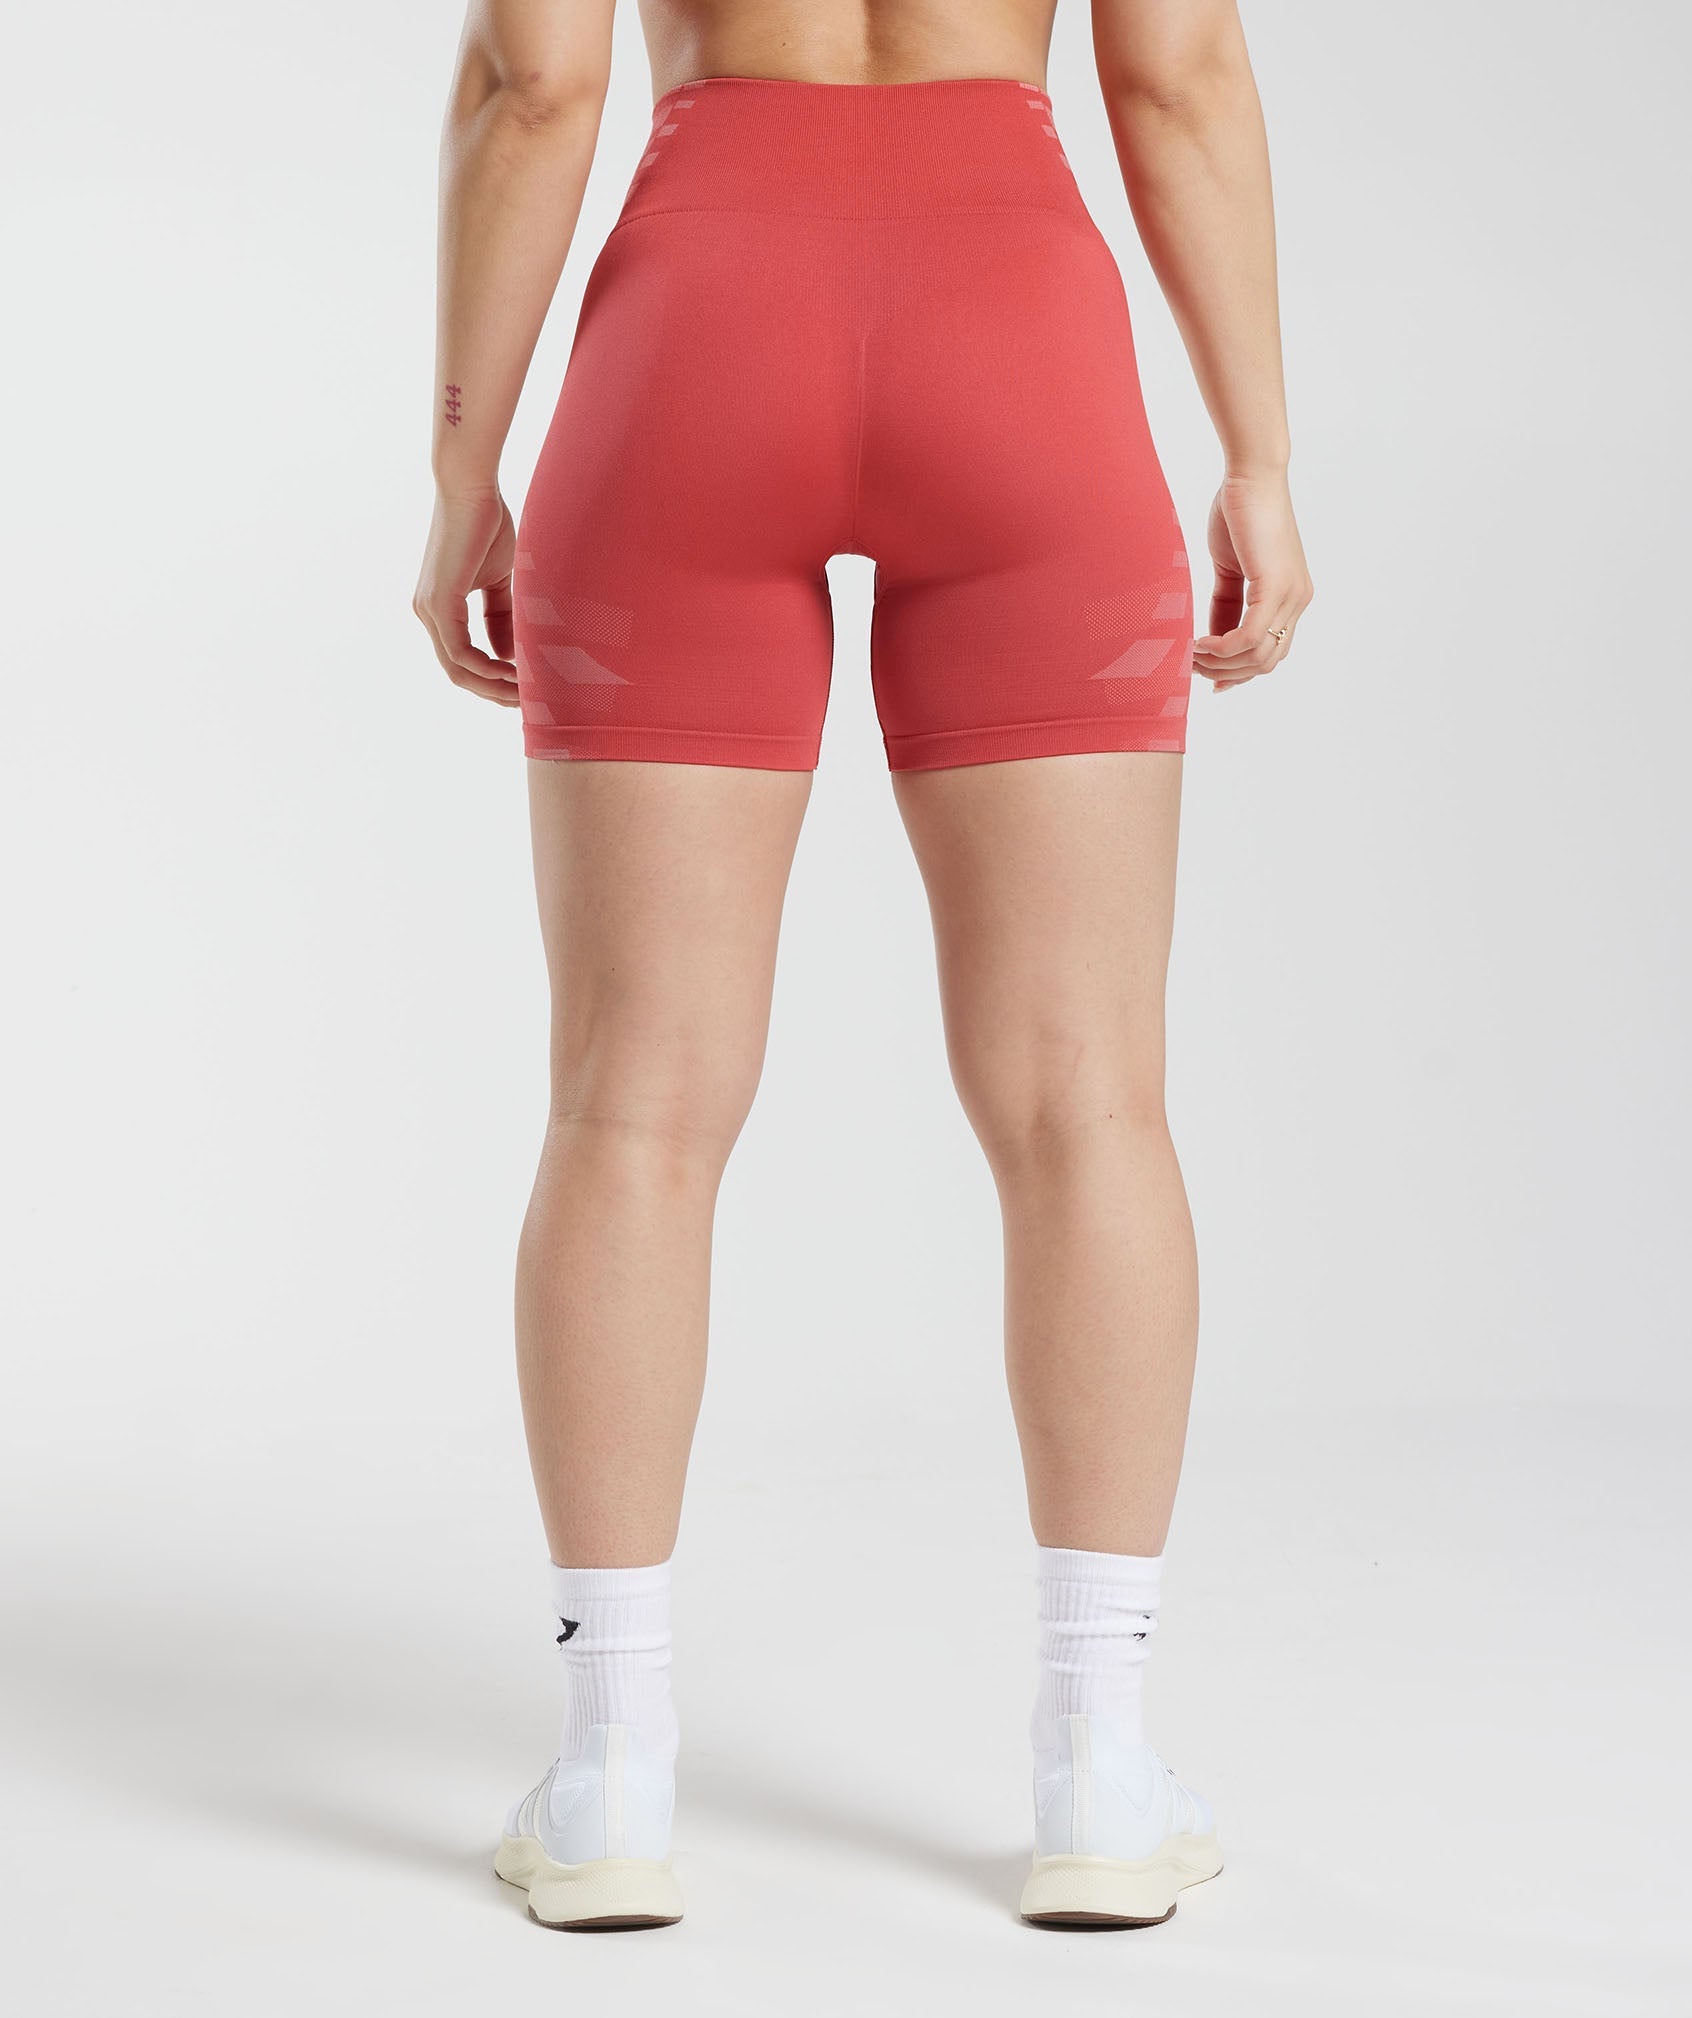 Apex Limit Shorts in Sundried Red/Terracotta Pink - view 2